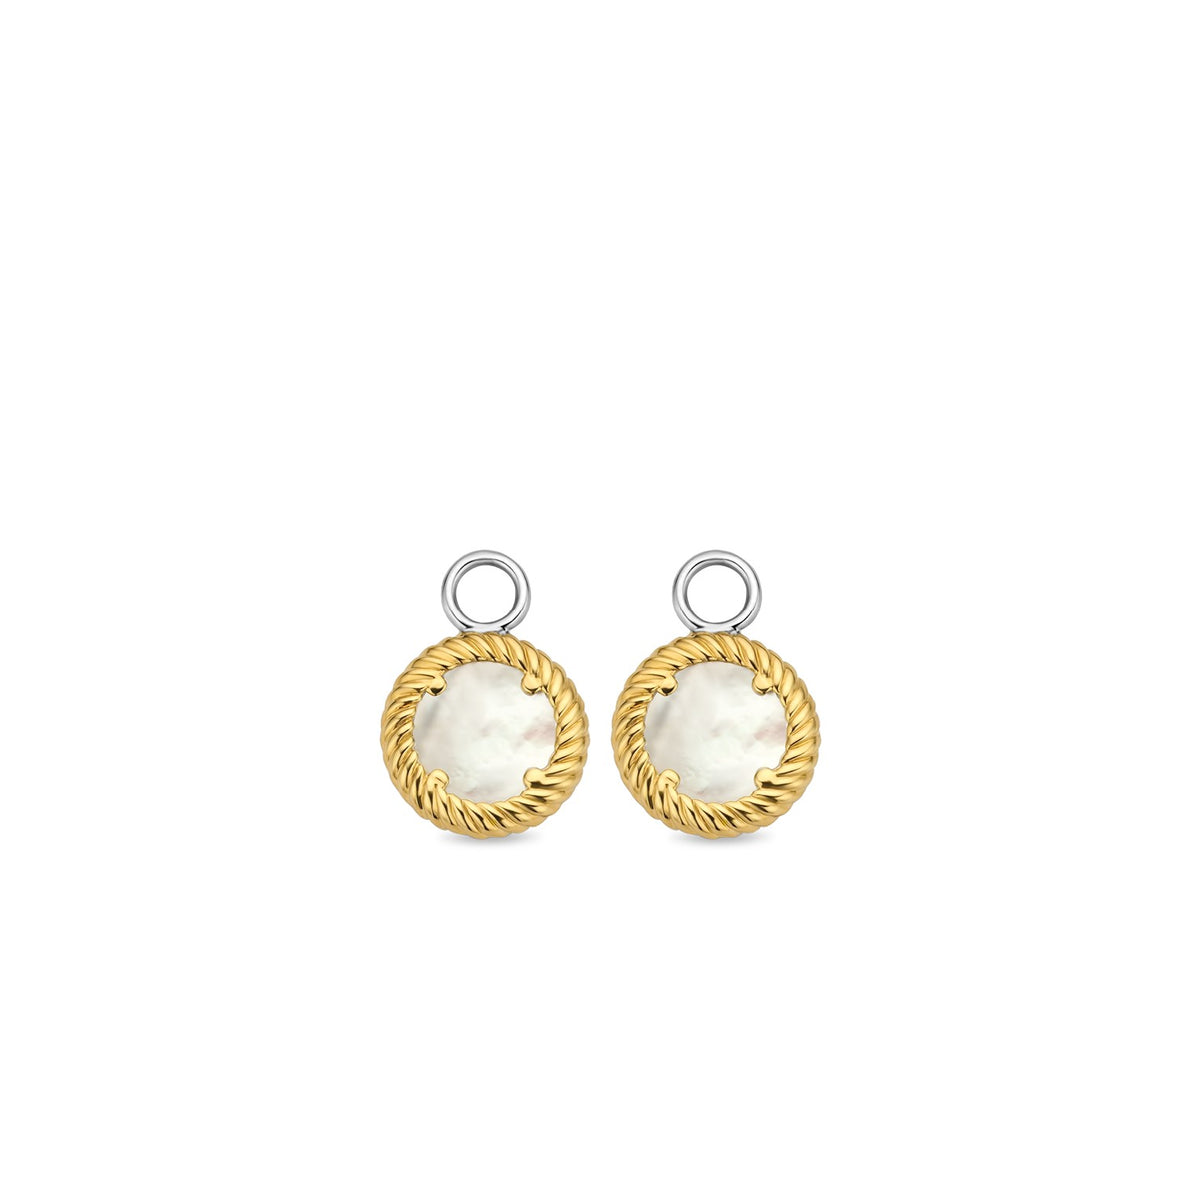 TI SENTO Sterling Silver and Gold Tone Ear Charms